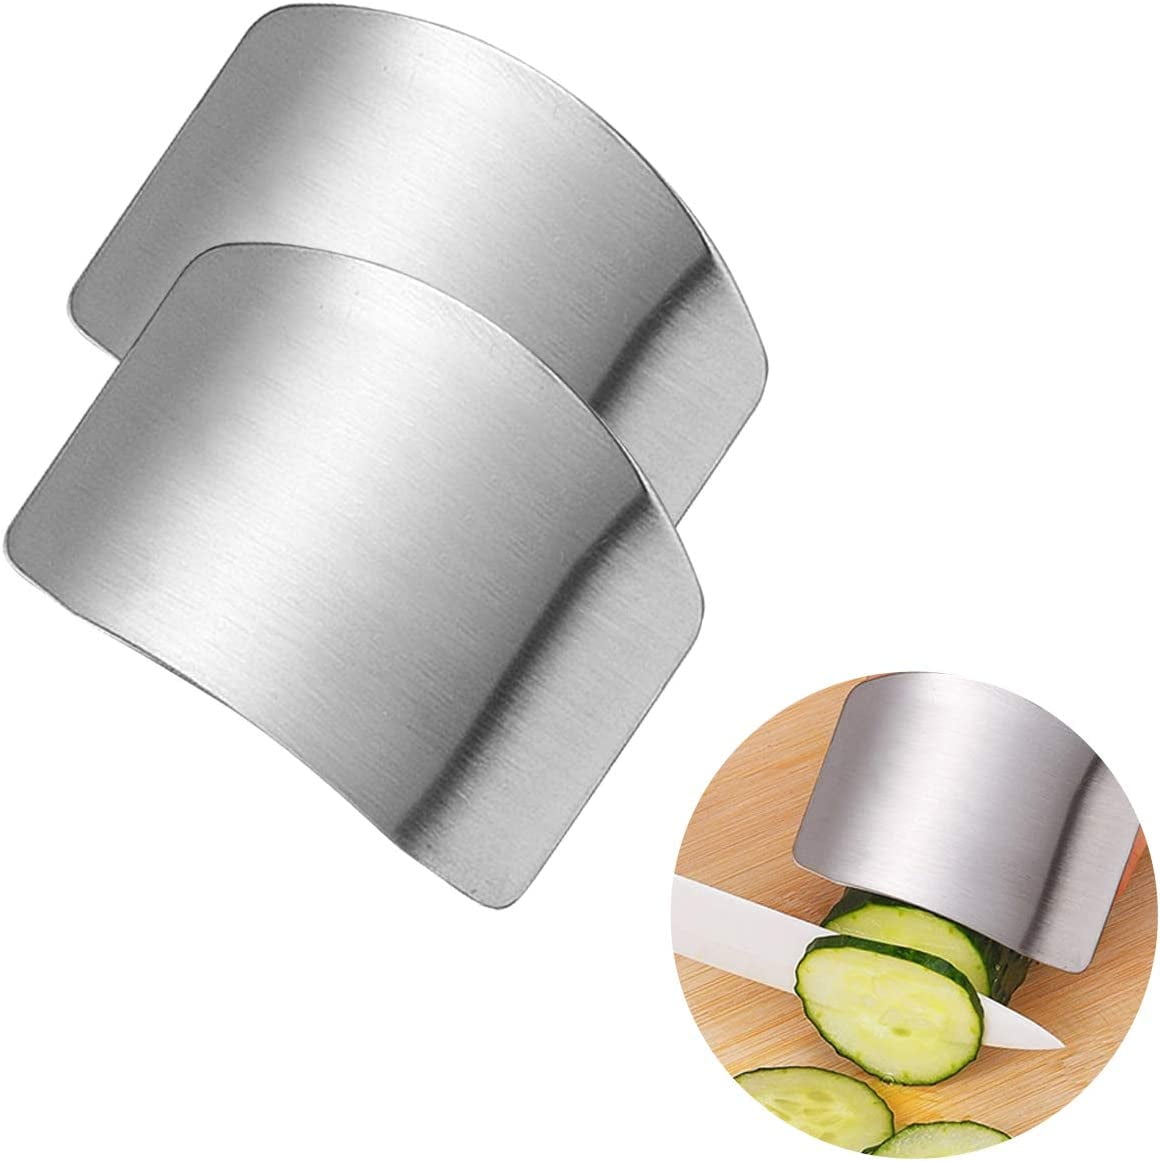  MAD SHARK Chef Finger Guards for Cutting with Gift Box, 2pcs  Premium 304 Stainless Steel Finger Protectors for Cutting, Slicing and  Chopping Vegetables, Fruits and Meat, Avoid Hurting Kitchen Tools: Home